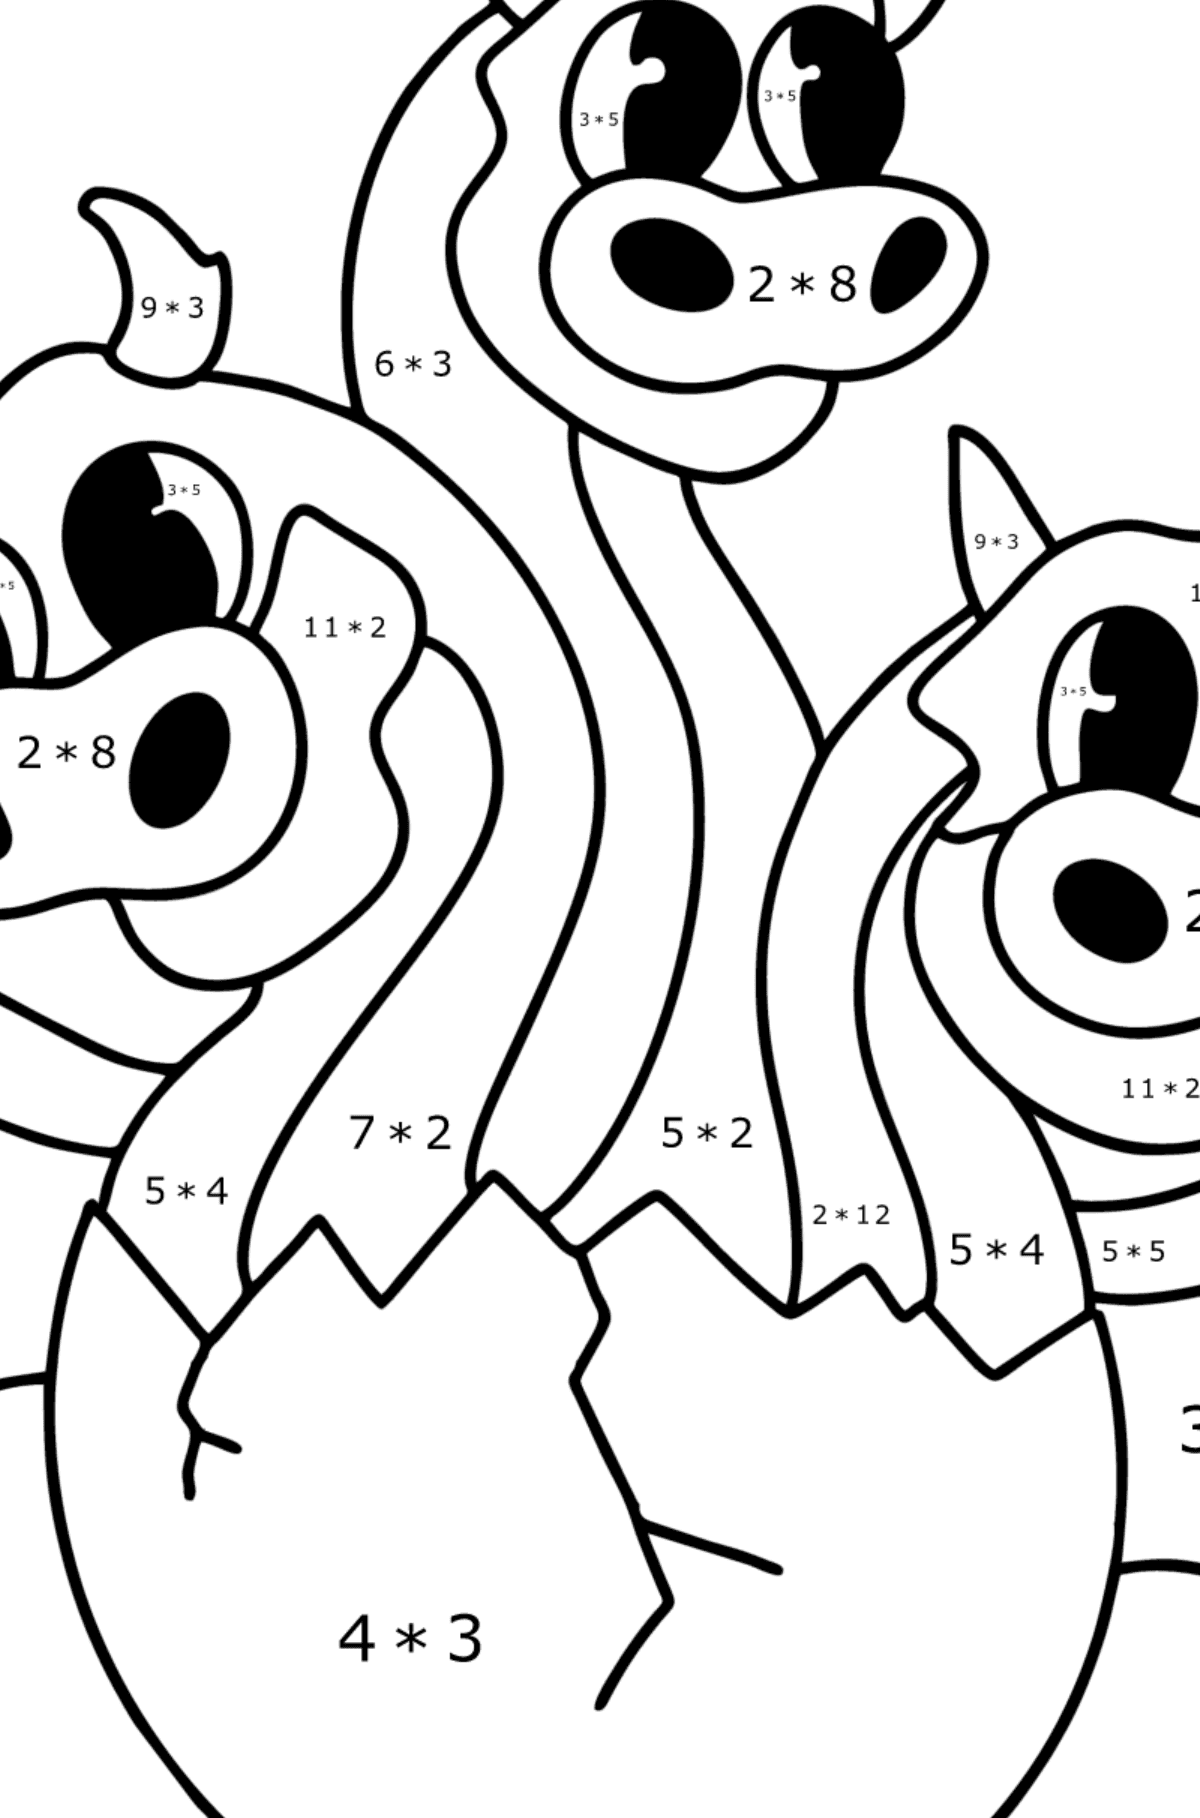 Dragon with three heads coloring page - Math Coloring - Multiplication for Kids